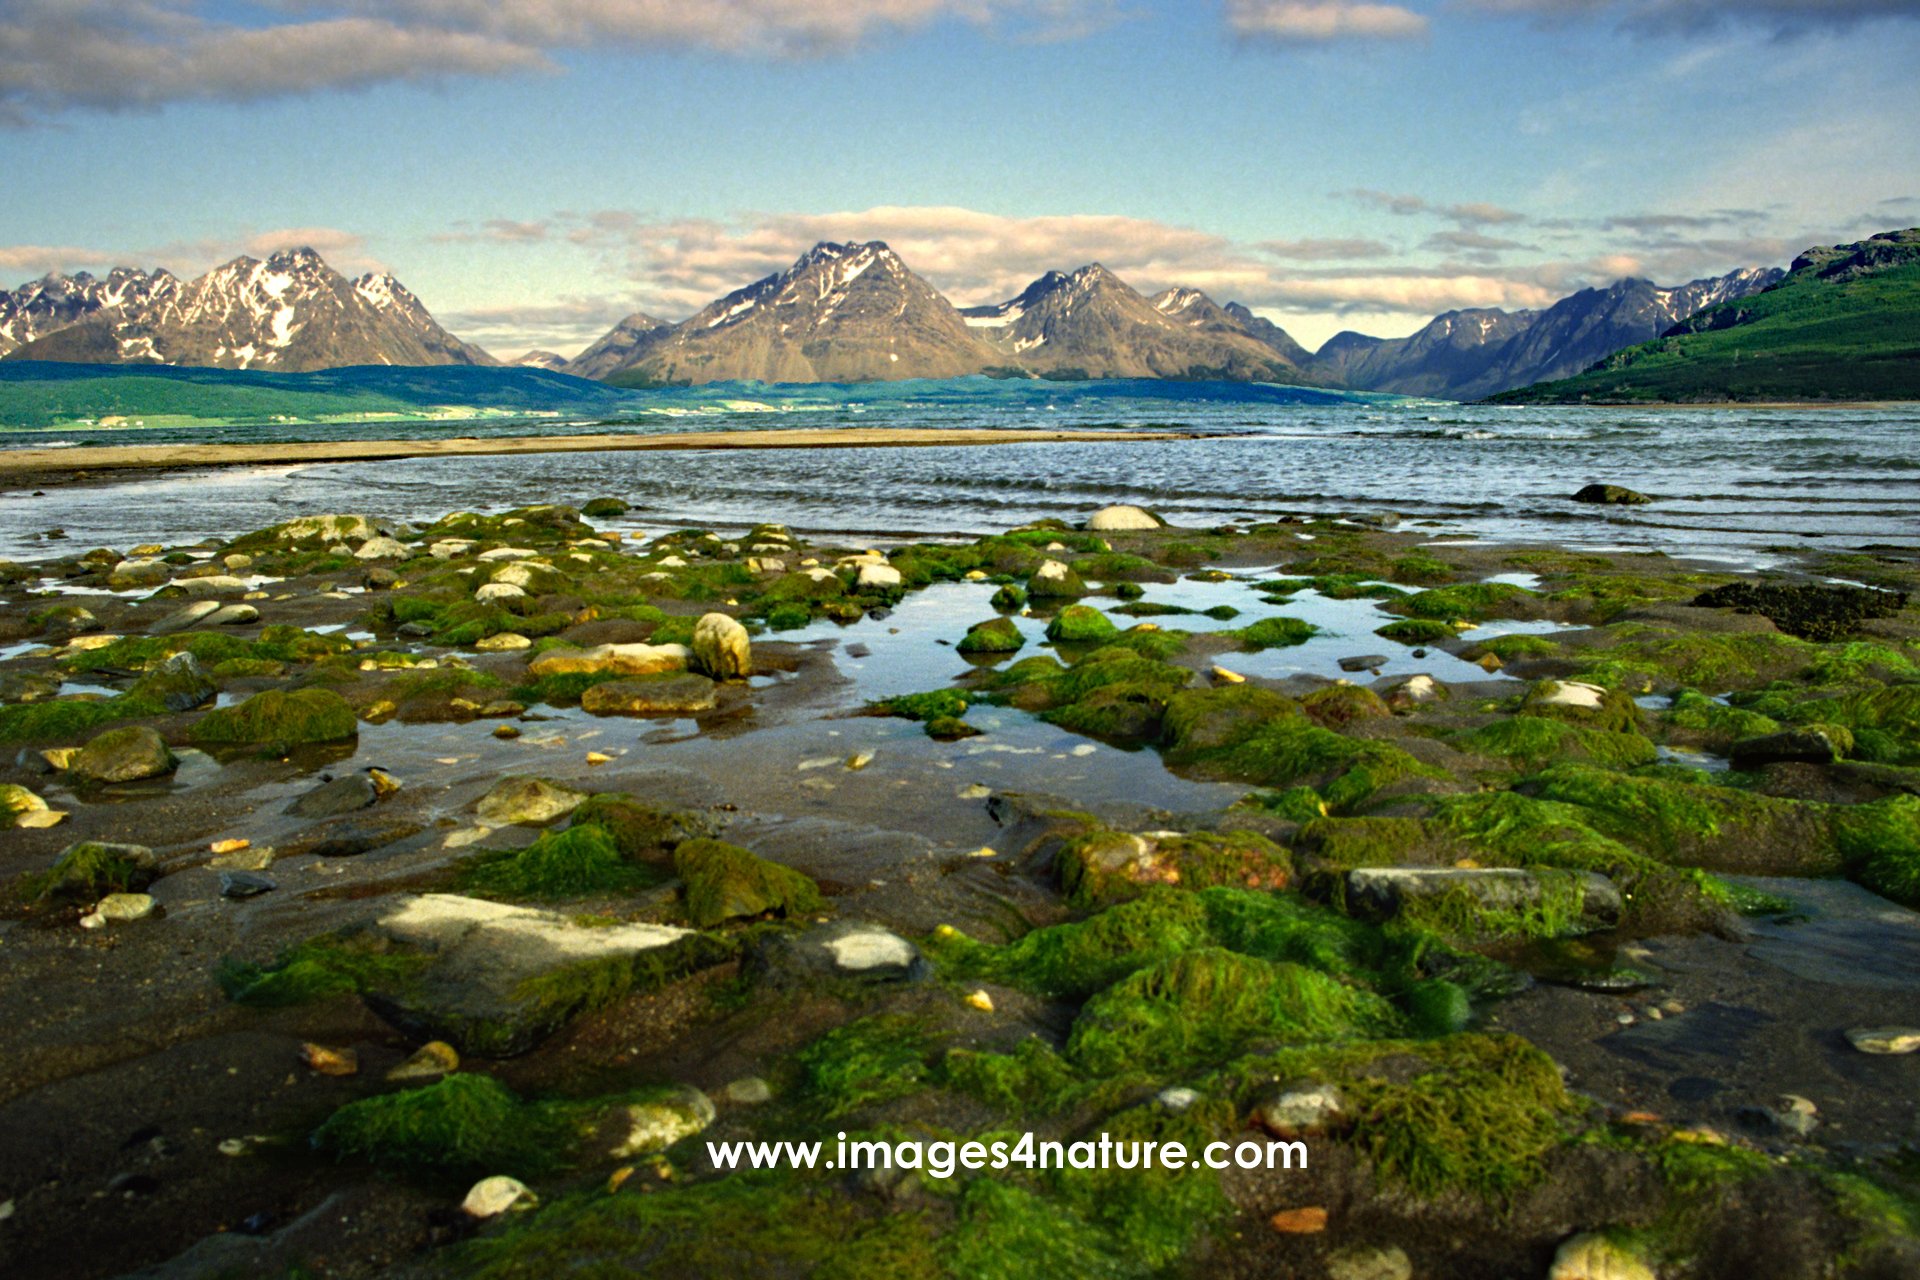 Stones and seaweed at ebb tide with fjord and mountain range